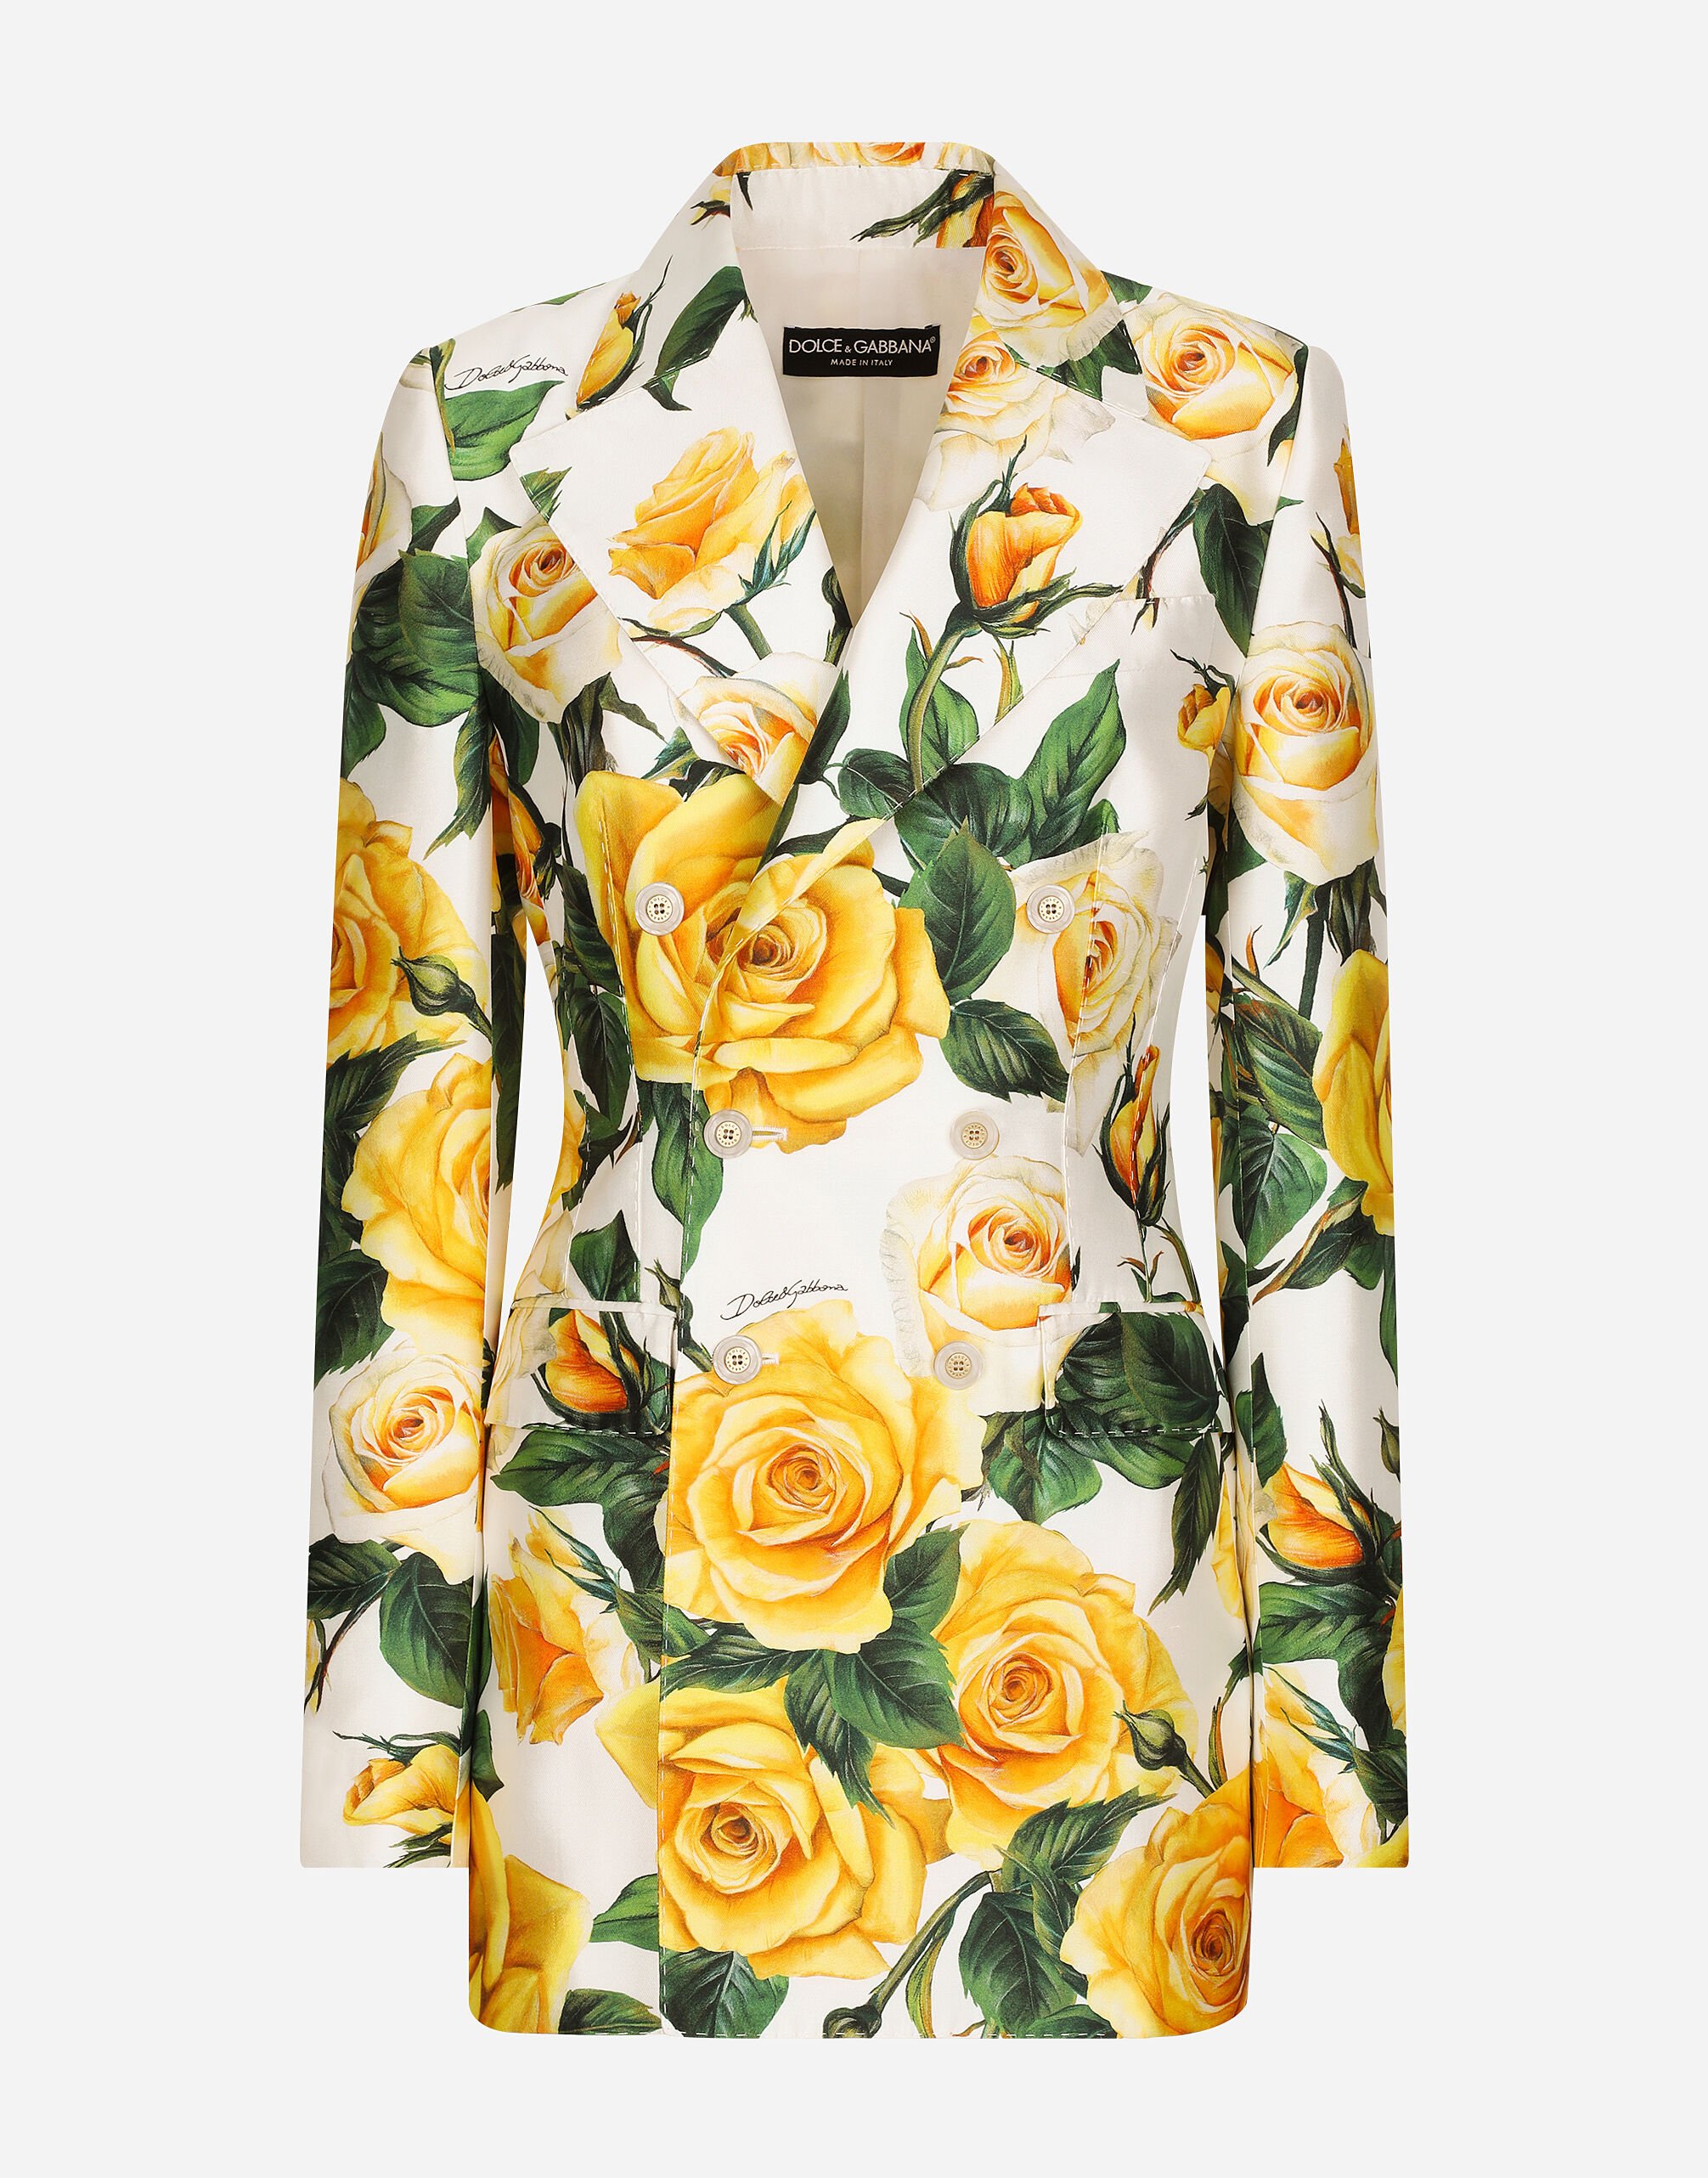 Dolce & Gabbana Double-breasted Turlington jacket in yellow rose-print mikado White F29UCTFJTBV